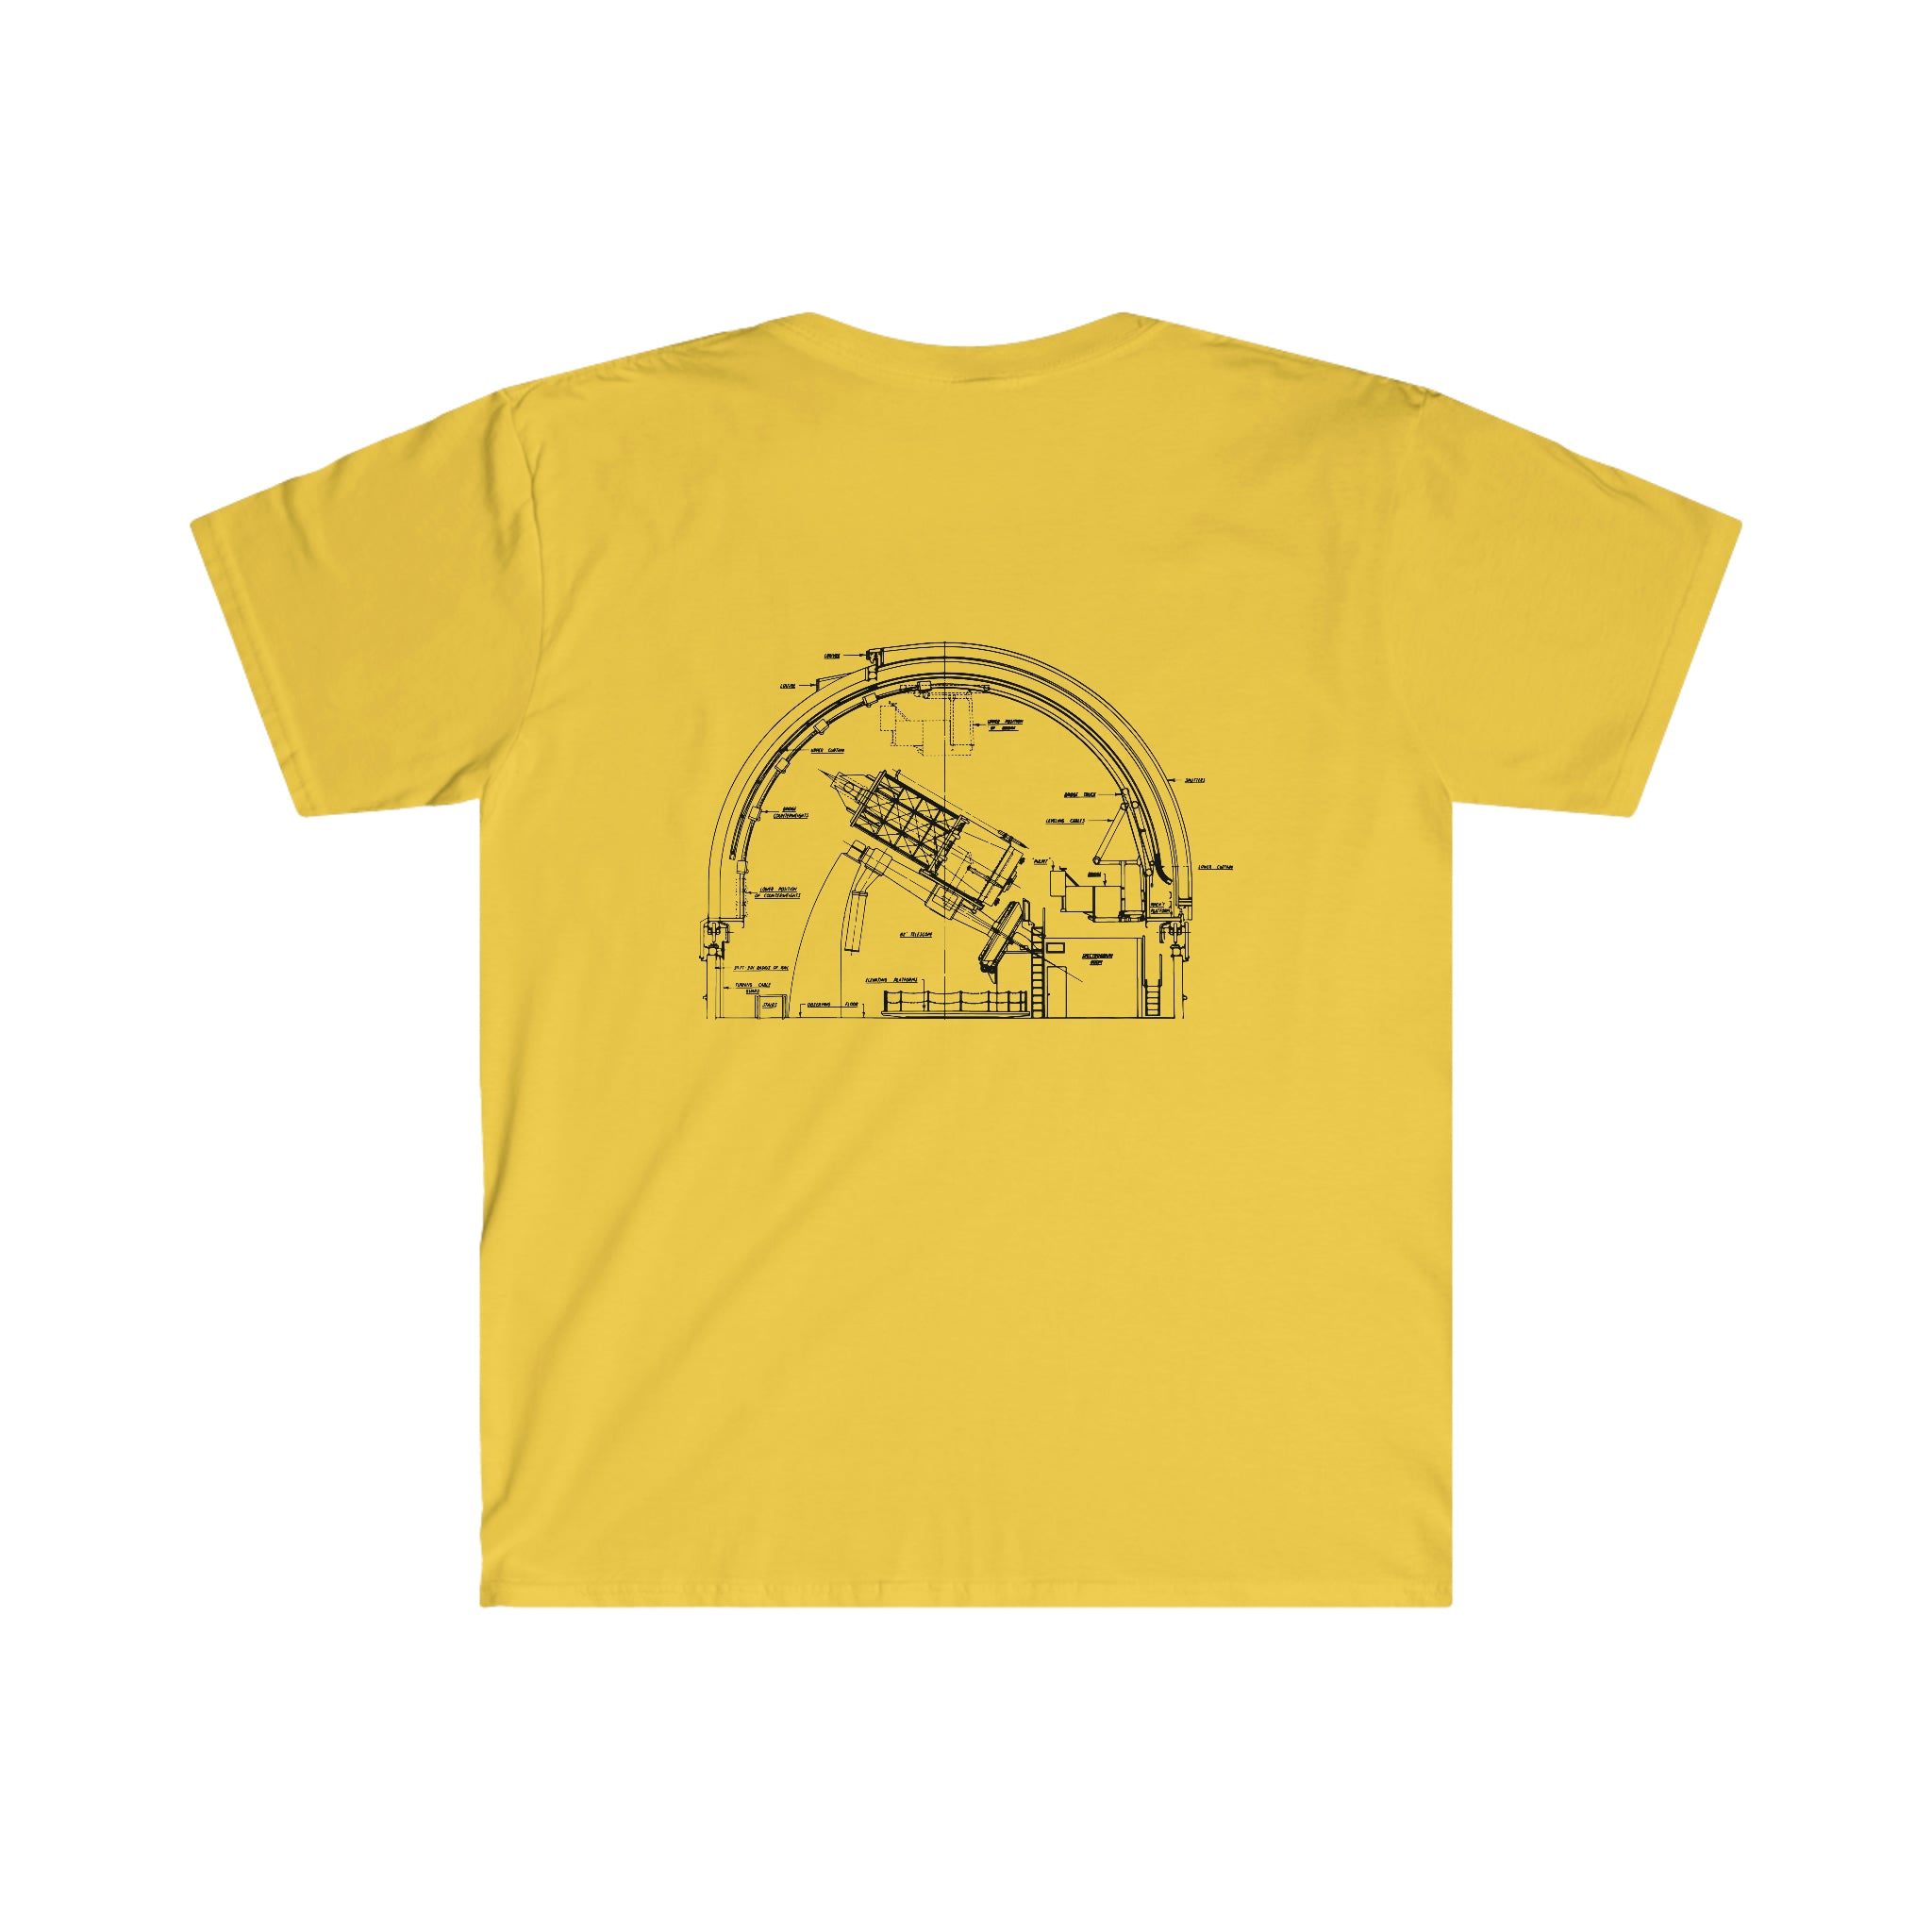 The Space is Waiting T-Shirt features a diagram of a rocket engine on a cotton shirt.